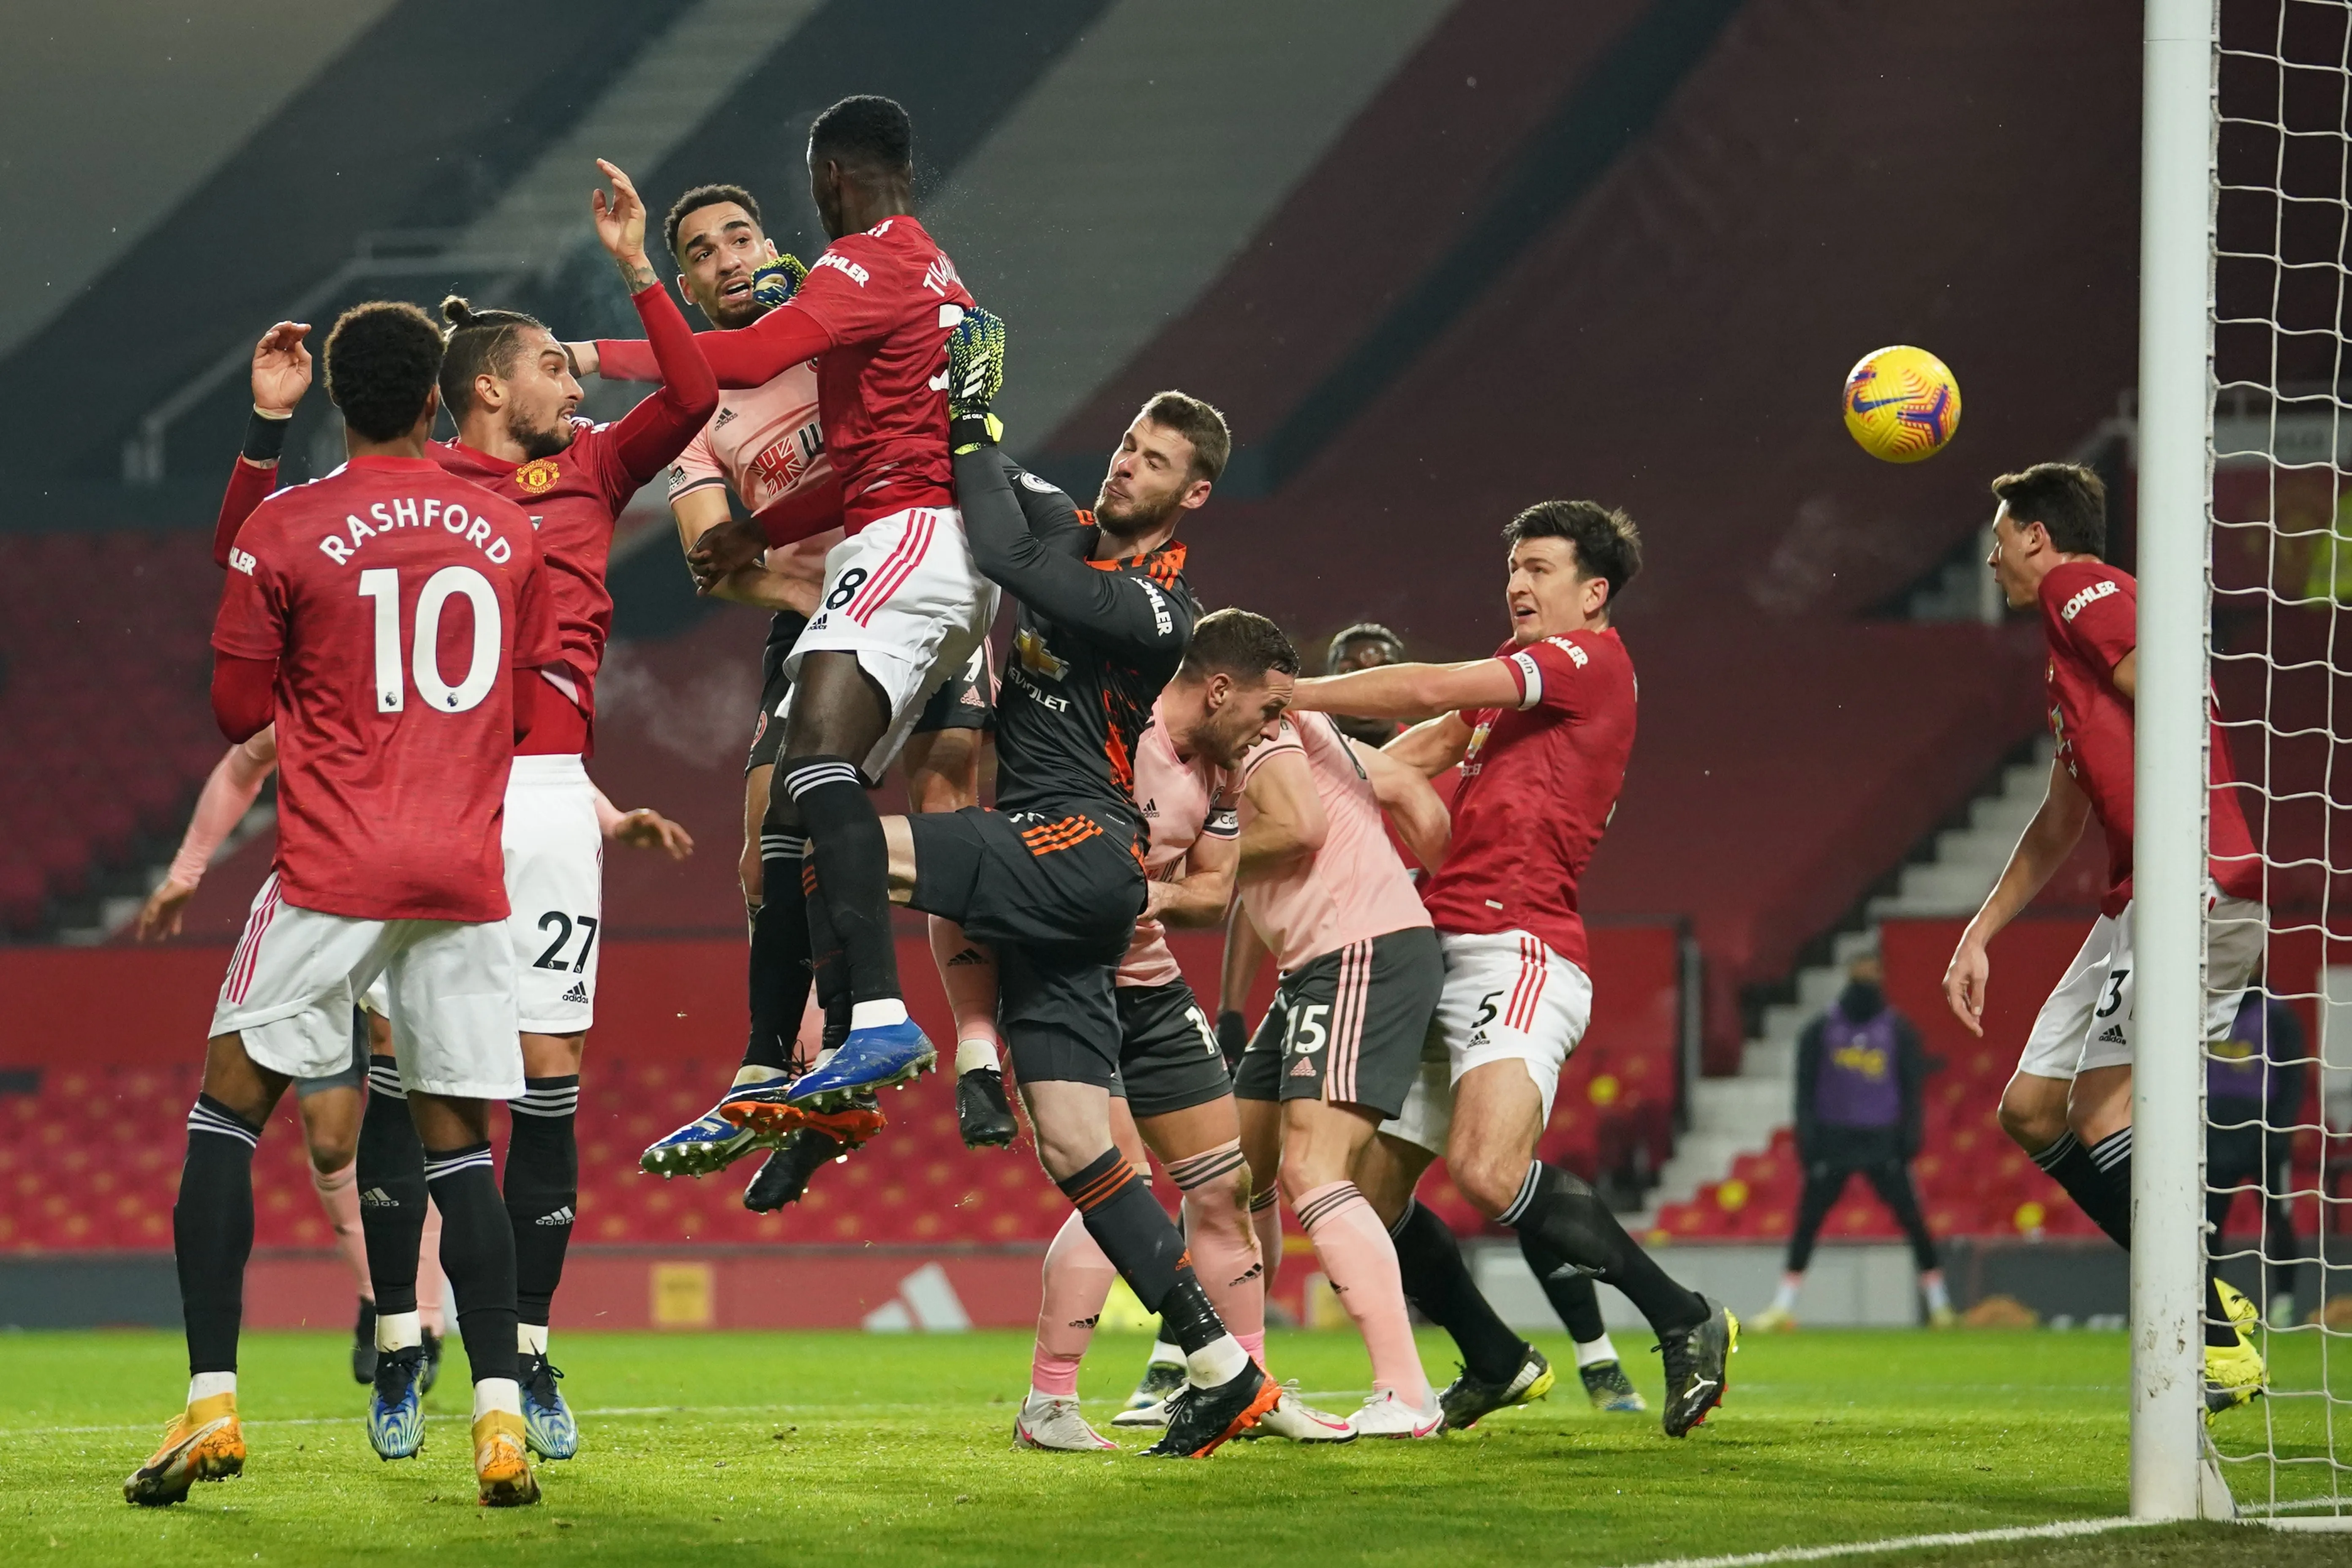 Sheffield United vs Manchester United Teams News, Prediction and H2H